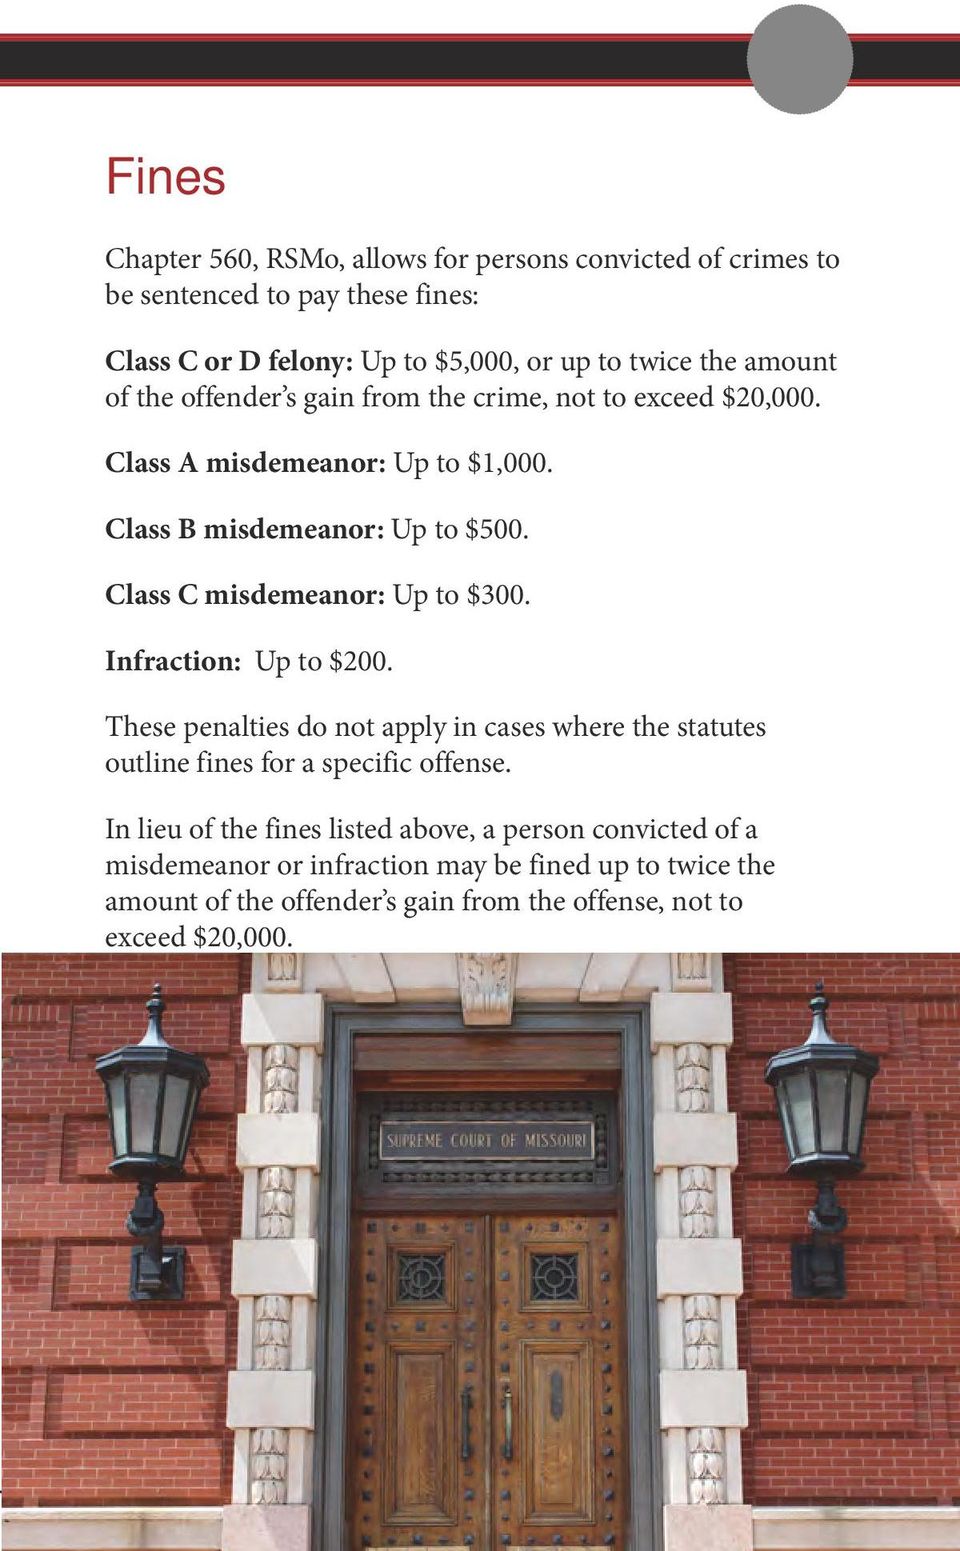 Class C misdemeanor: Up to $300. Infraction: Up to $200. These penalties do not apply in cases where the statutes outline fines for a specific offense.